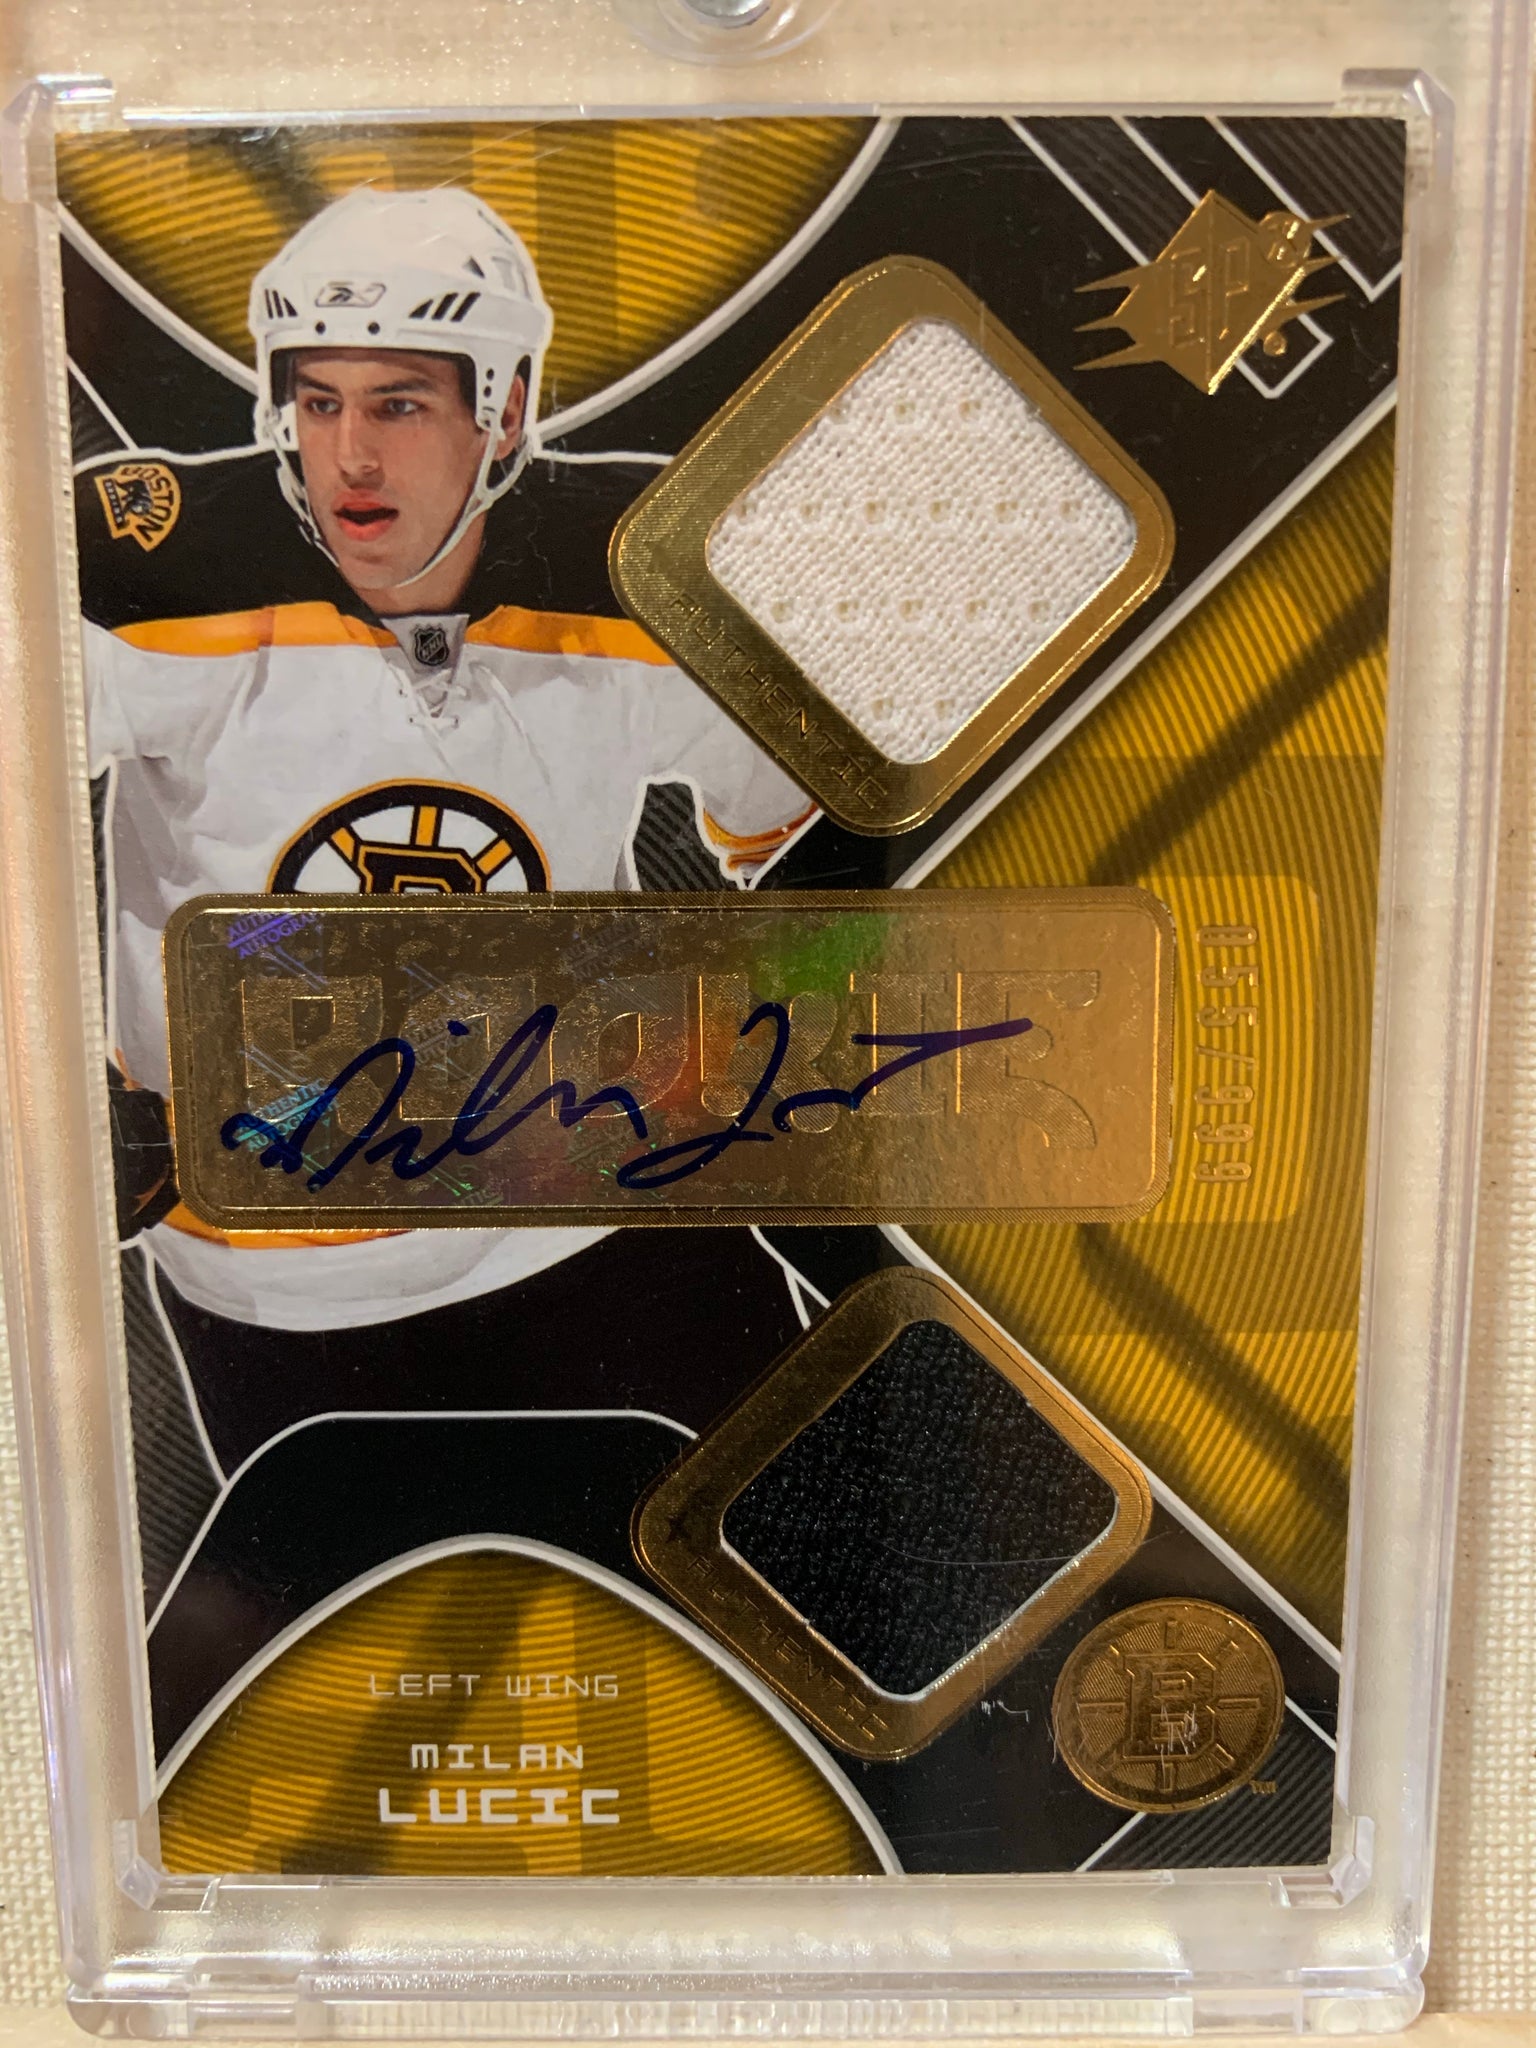 2007-08 SPX HOCKEY #206 BOSTON BRUINS - MILAN LUCIC SPX AUTOGRAPHED JERSEY ROOKIE CARD RAW